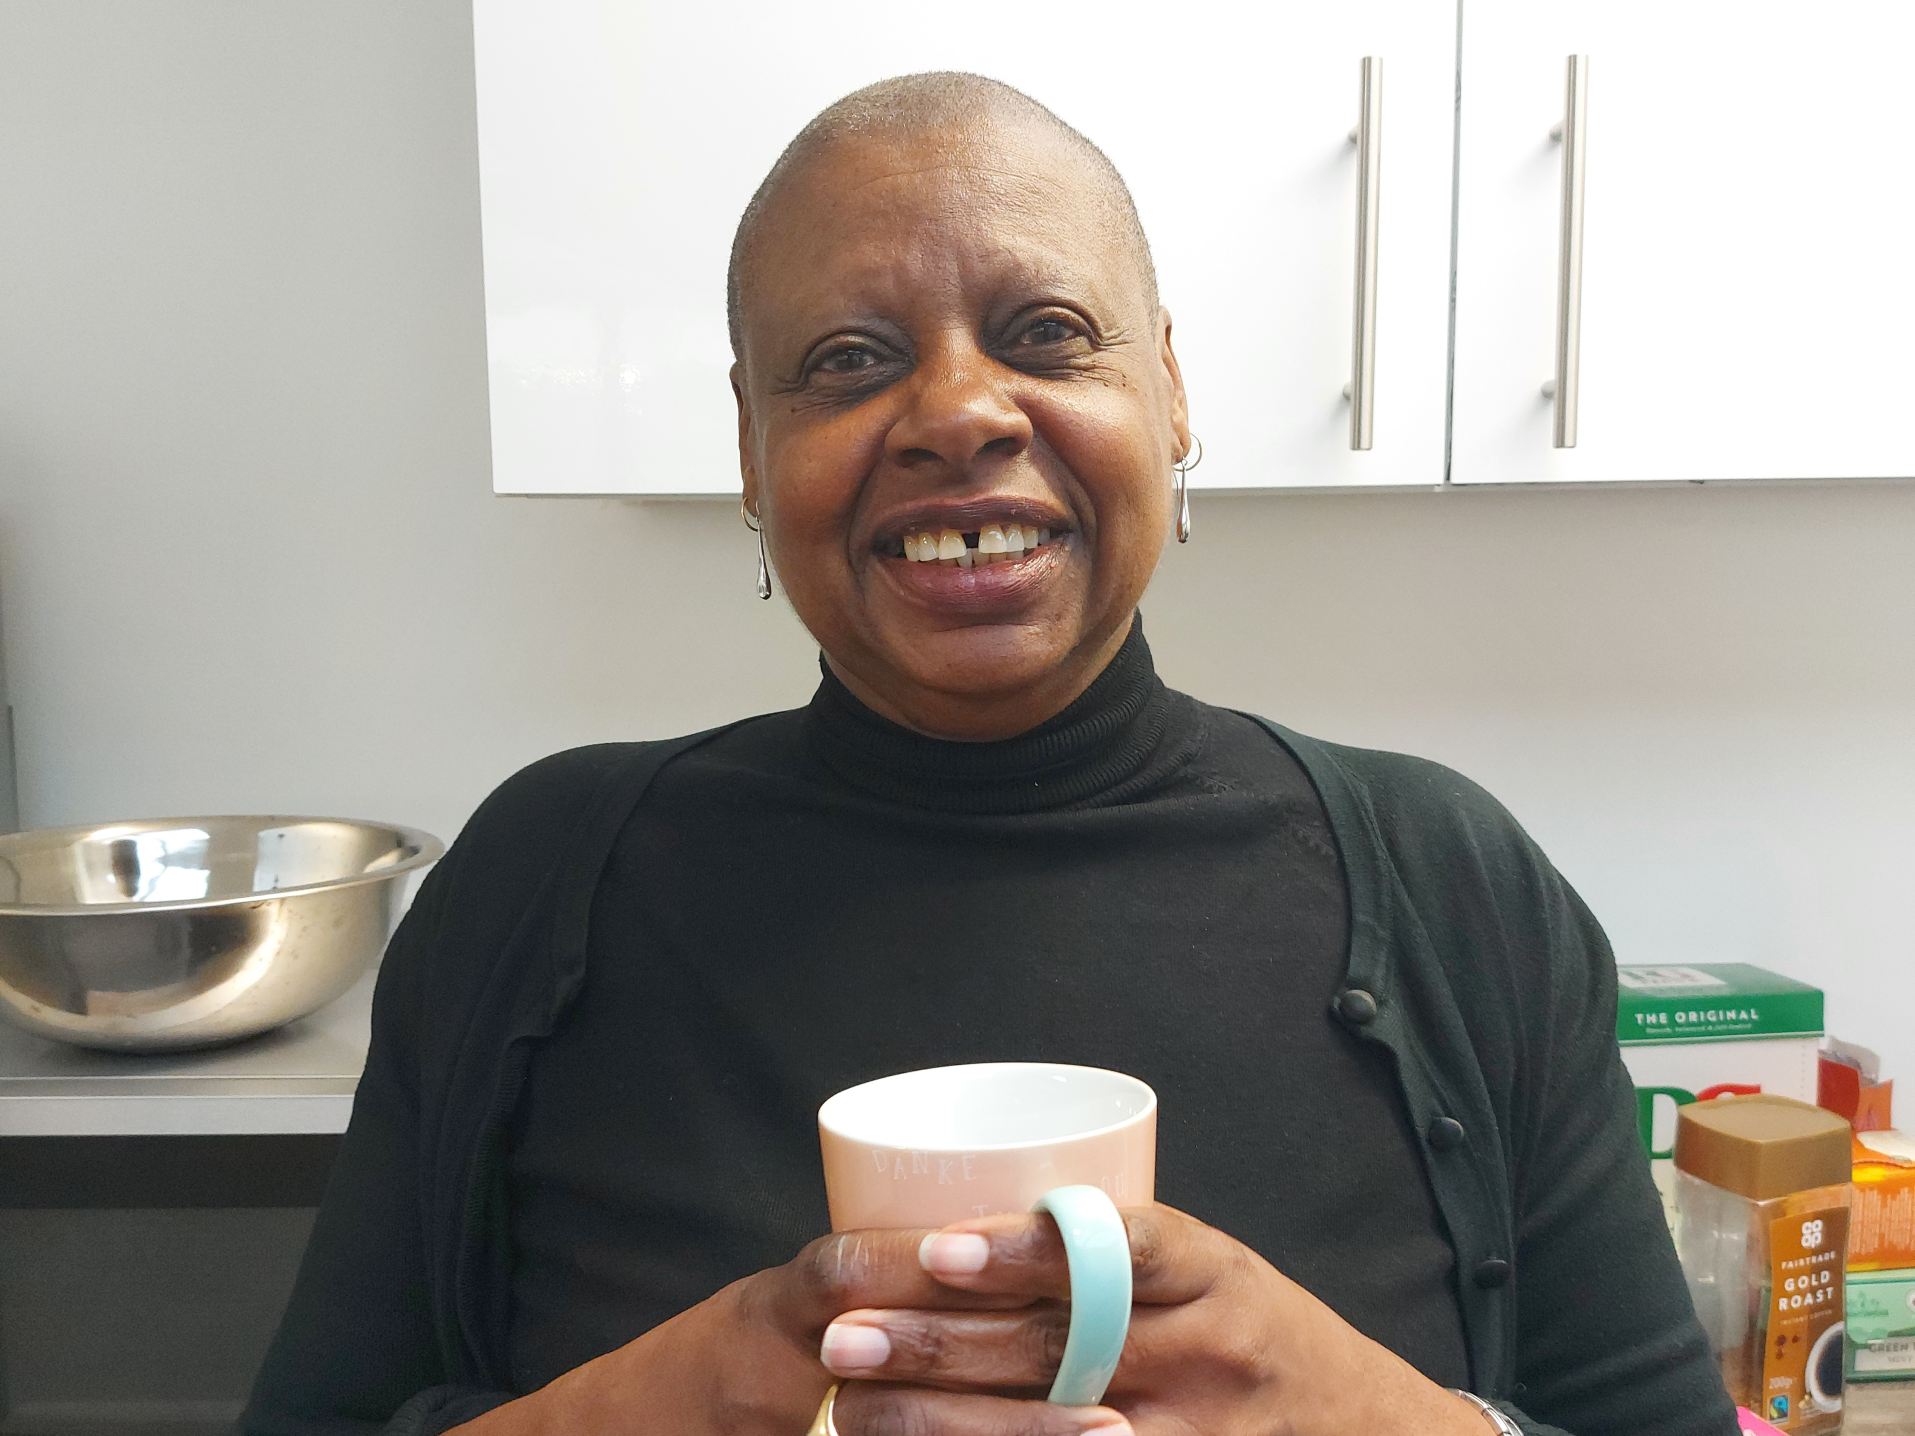 Dorrett holding a cup of tea in front of the kitchen and smiling at the camera